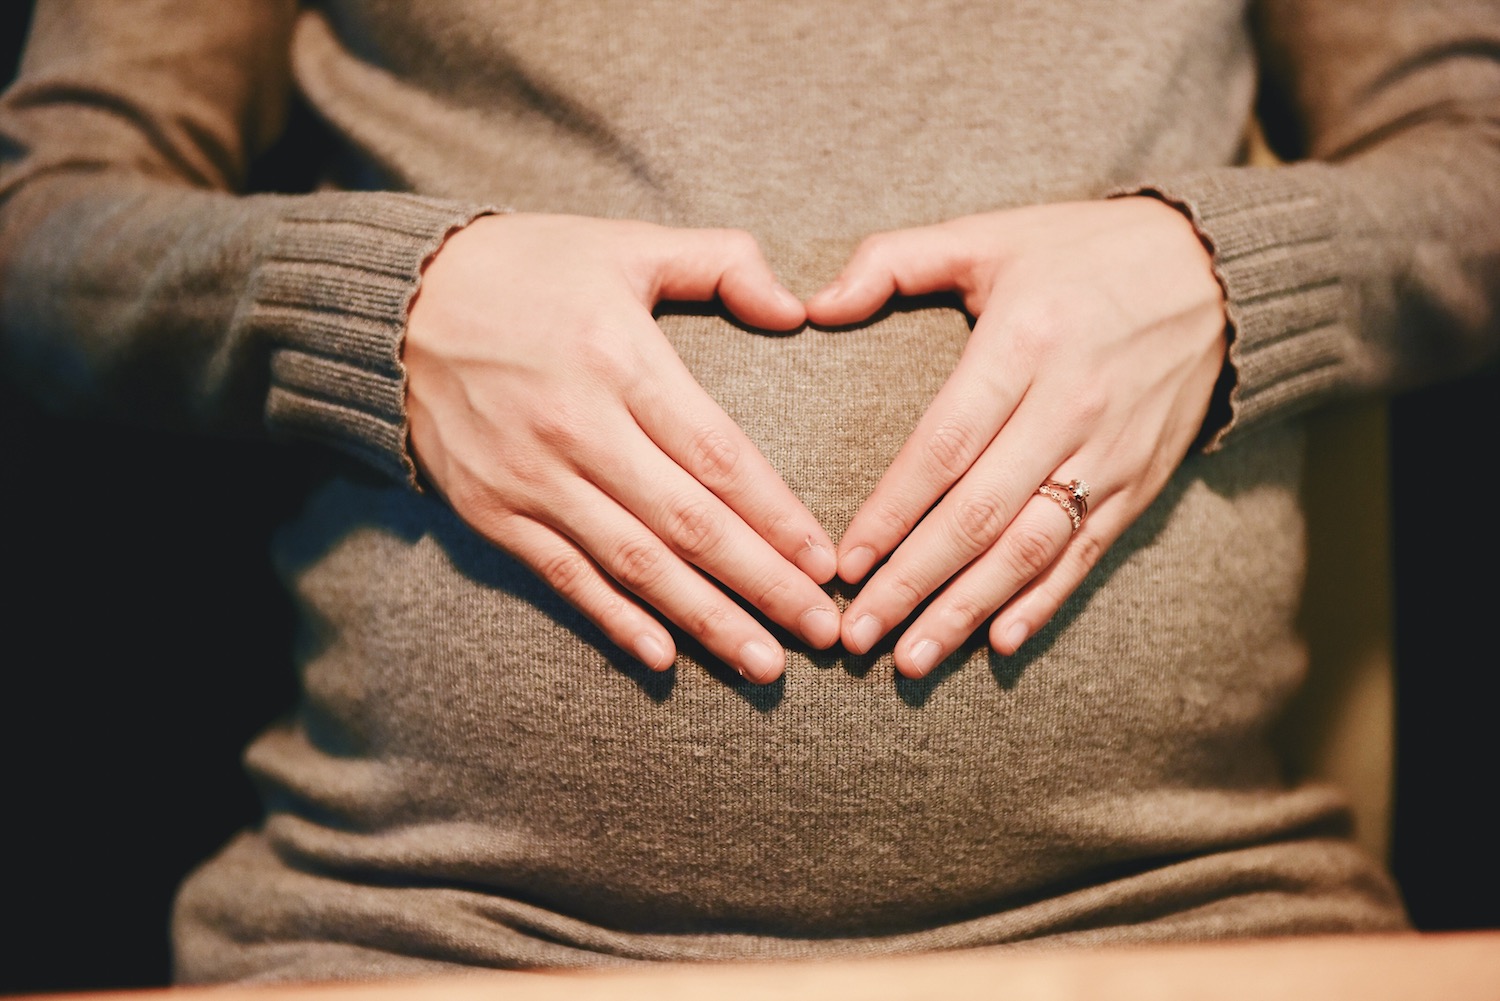 pregnancy and gingivitis, a pregnant woman in a sweater forming a heart with her hands on her belly. original public domain image from wikimedia commons